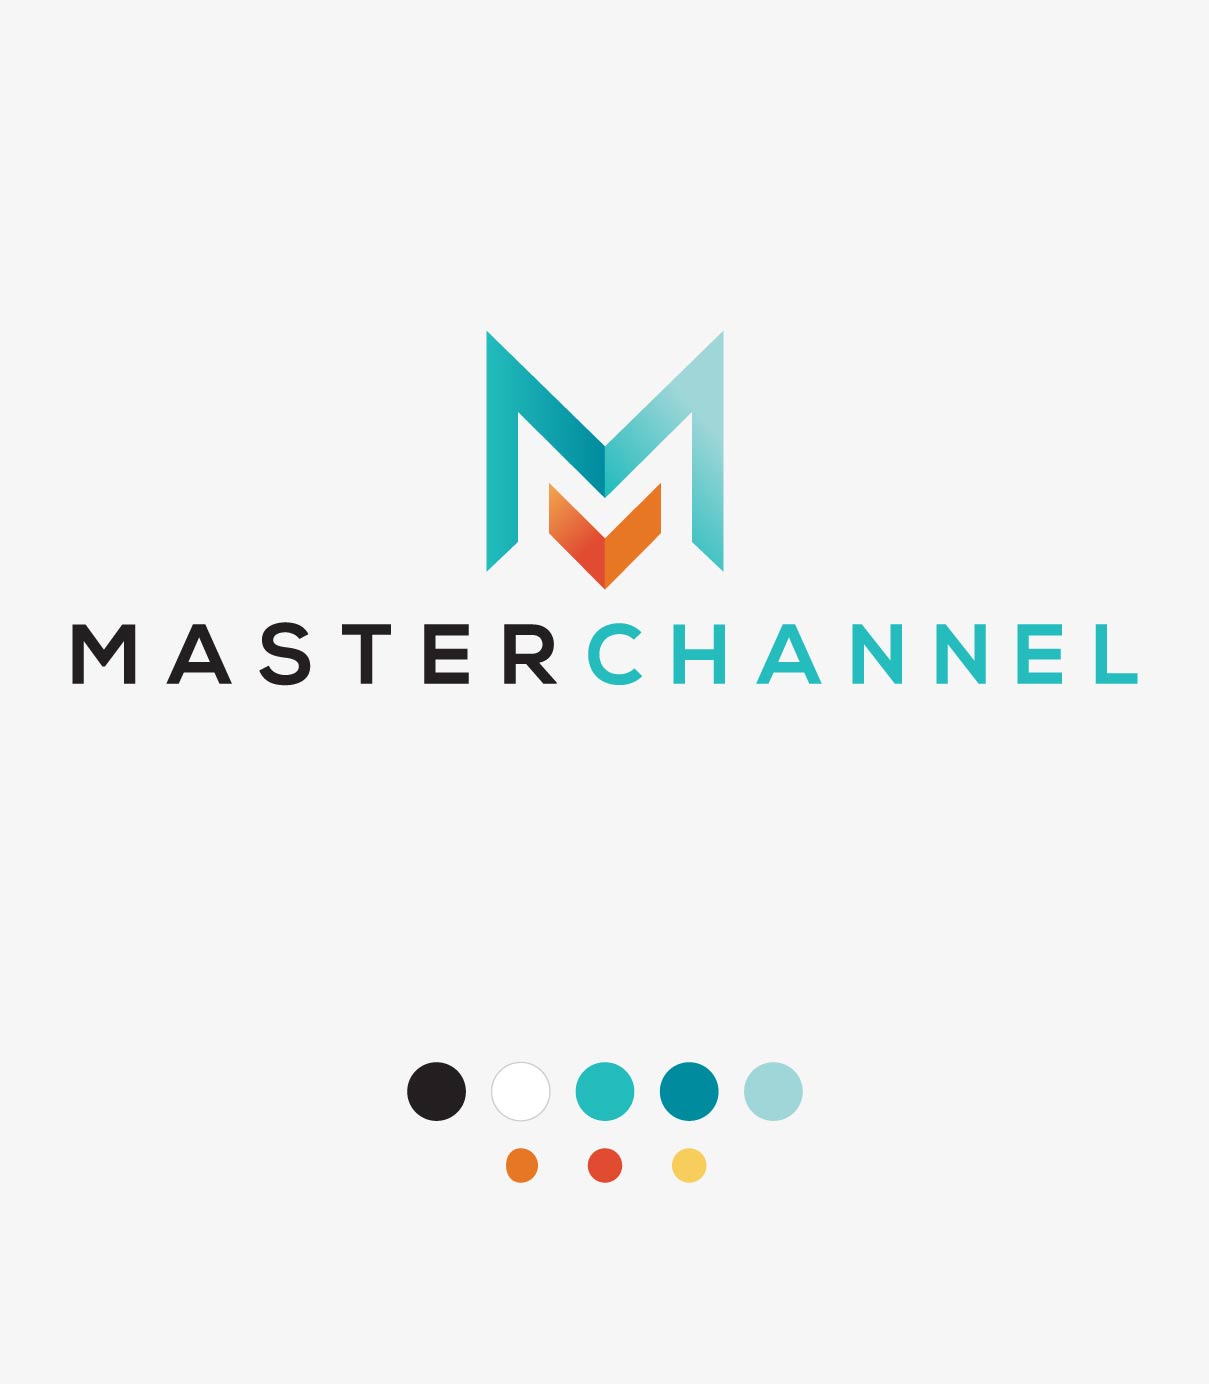 Full color logo with color swatches as part of visual corporate identity for Master Channel in Nashville, Tennessee